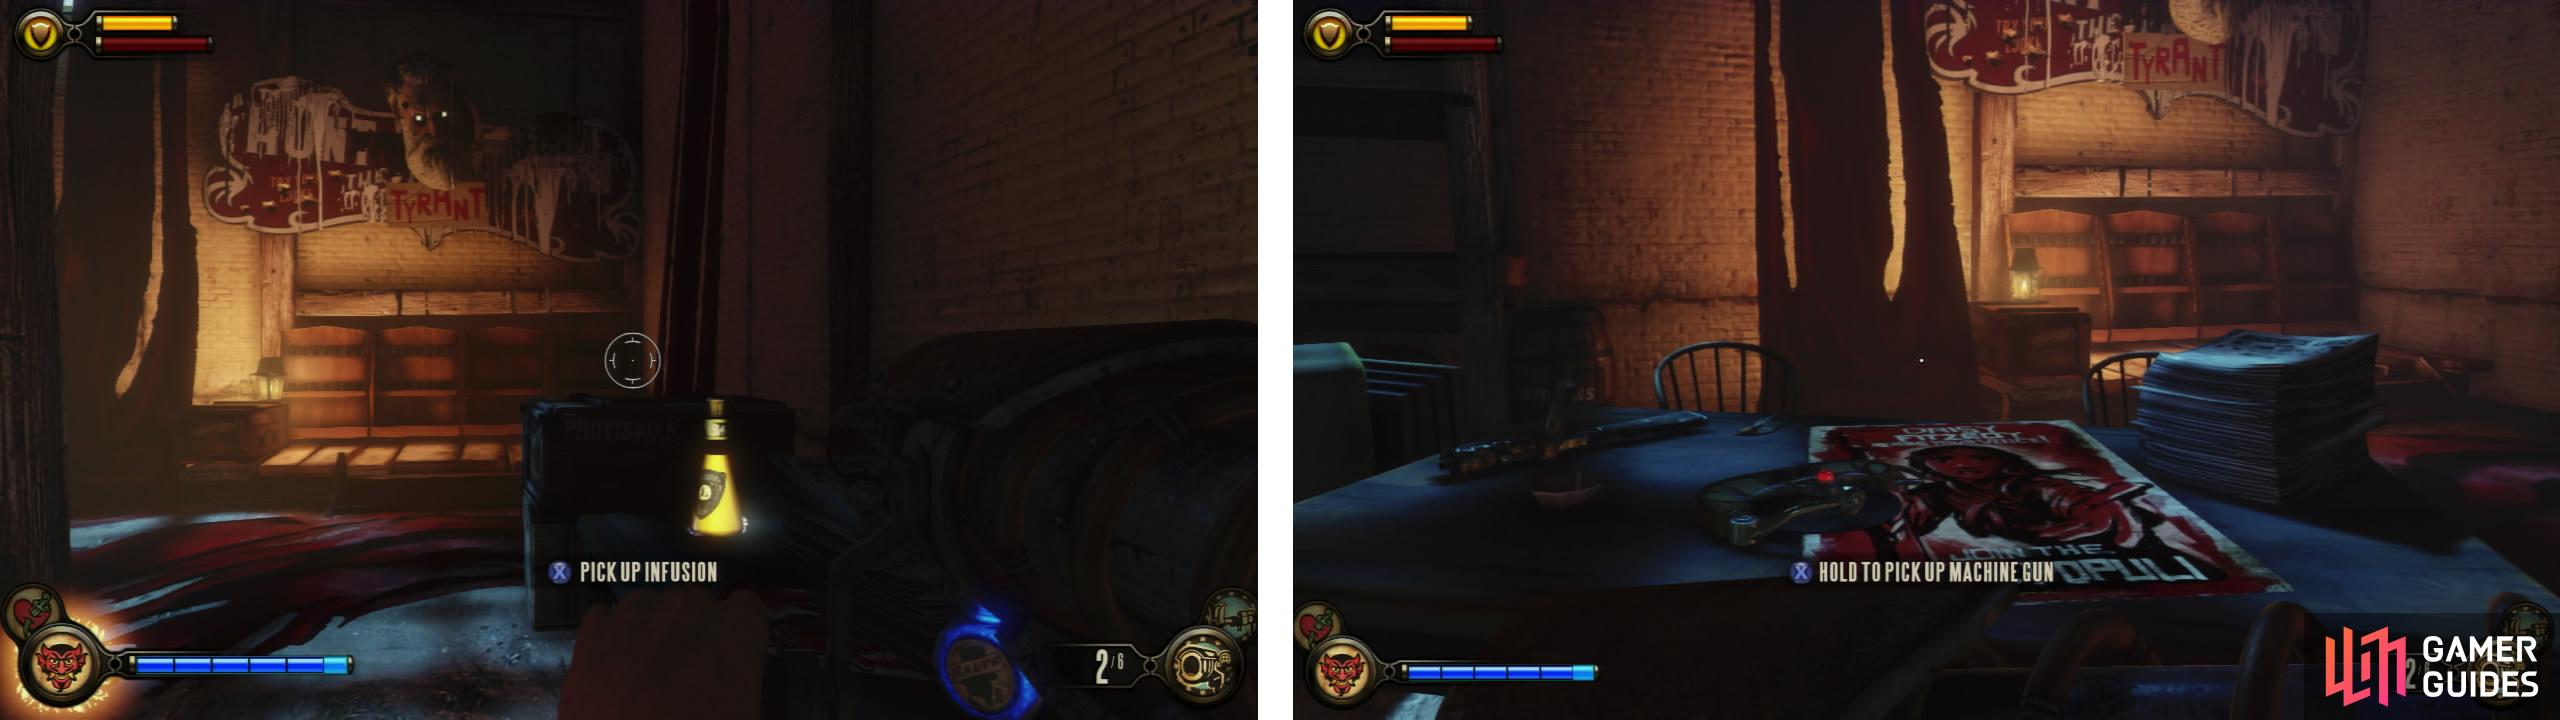 Within the secret room you’ll find an Infusion Upgrade (left) and a Voxophone (right).